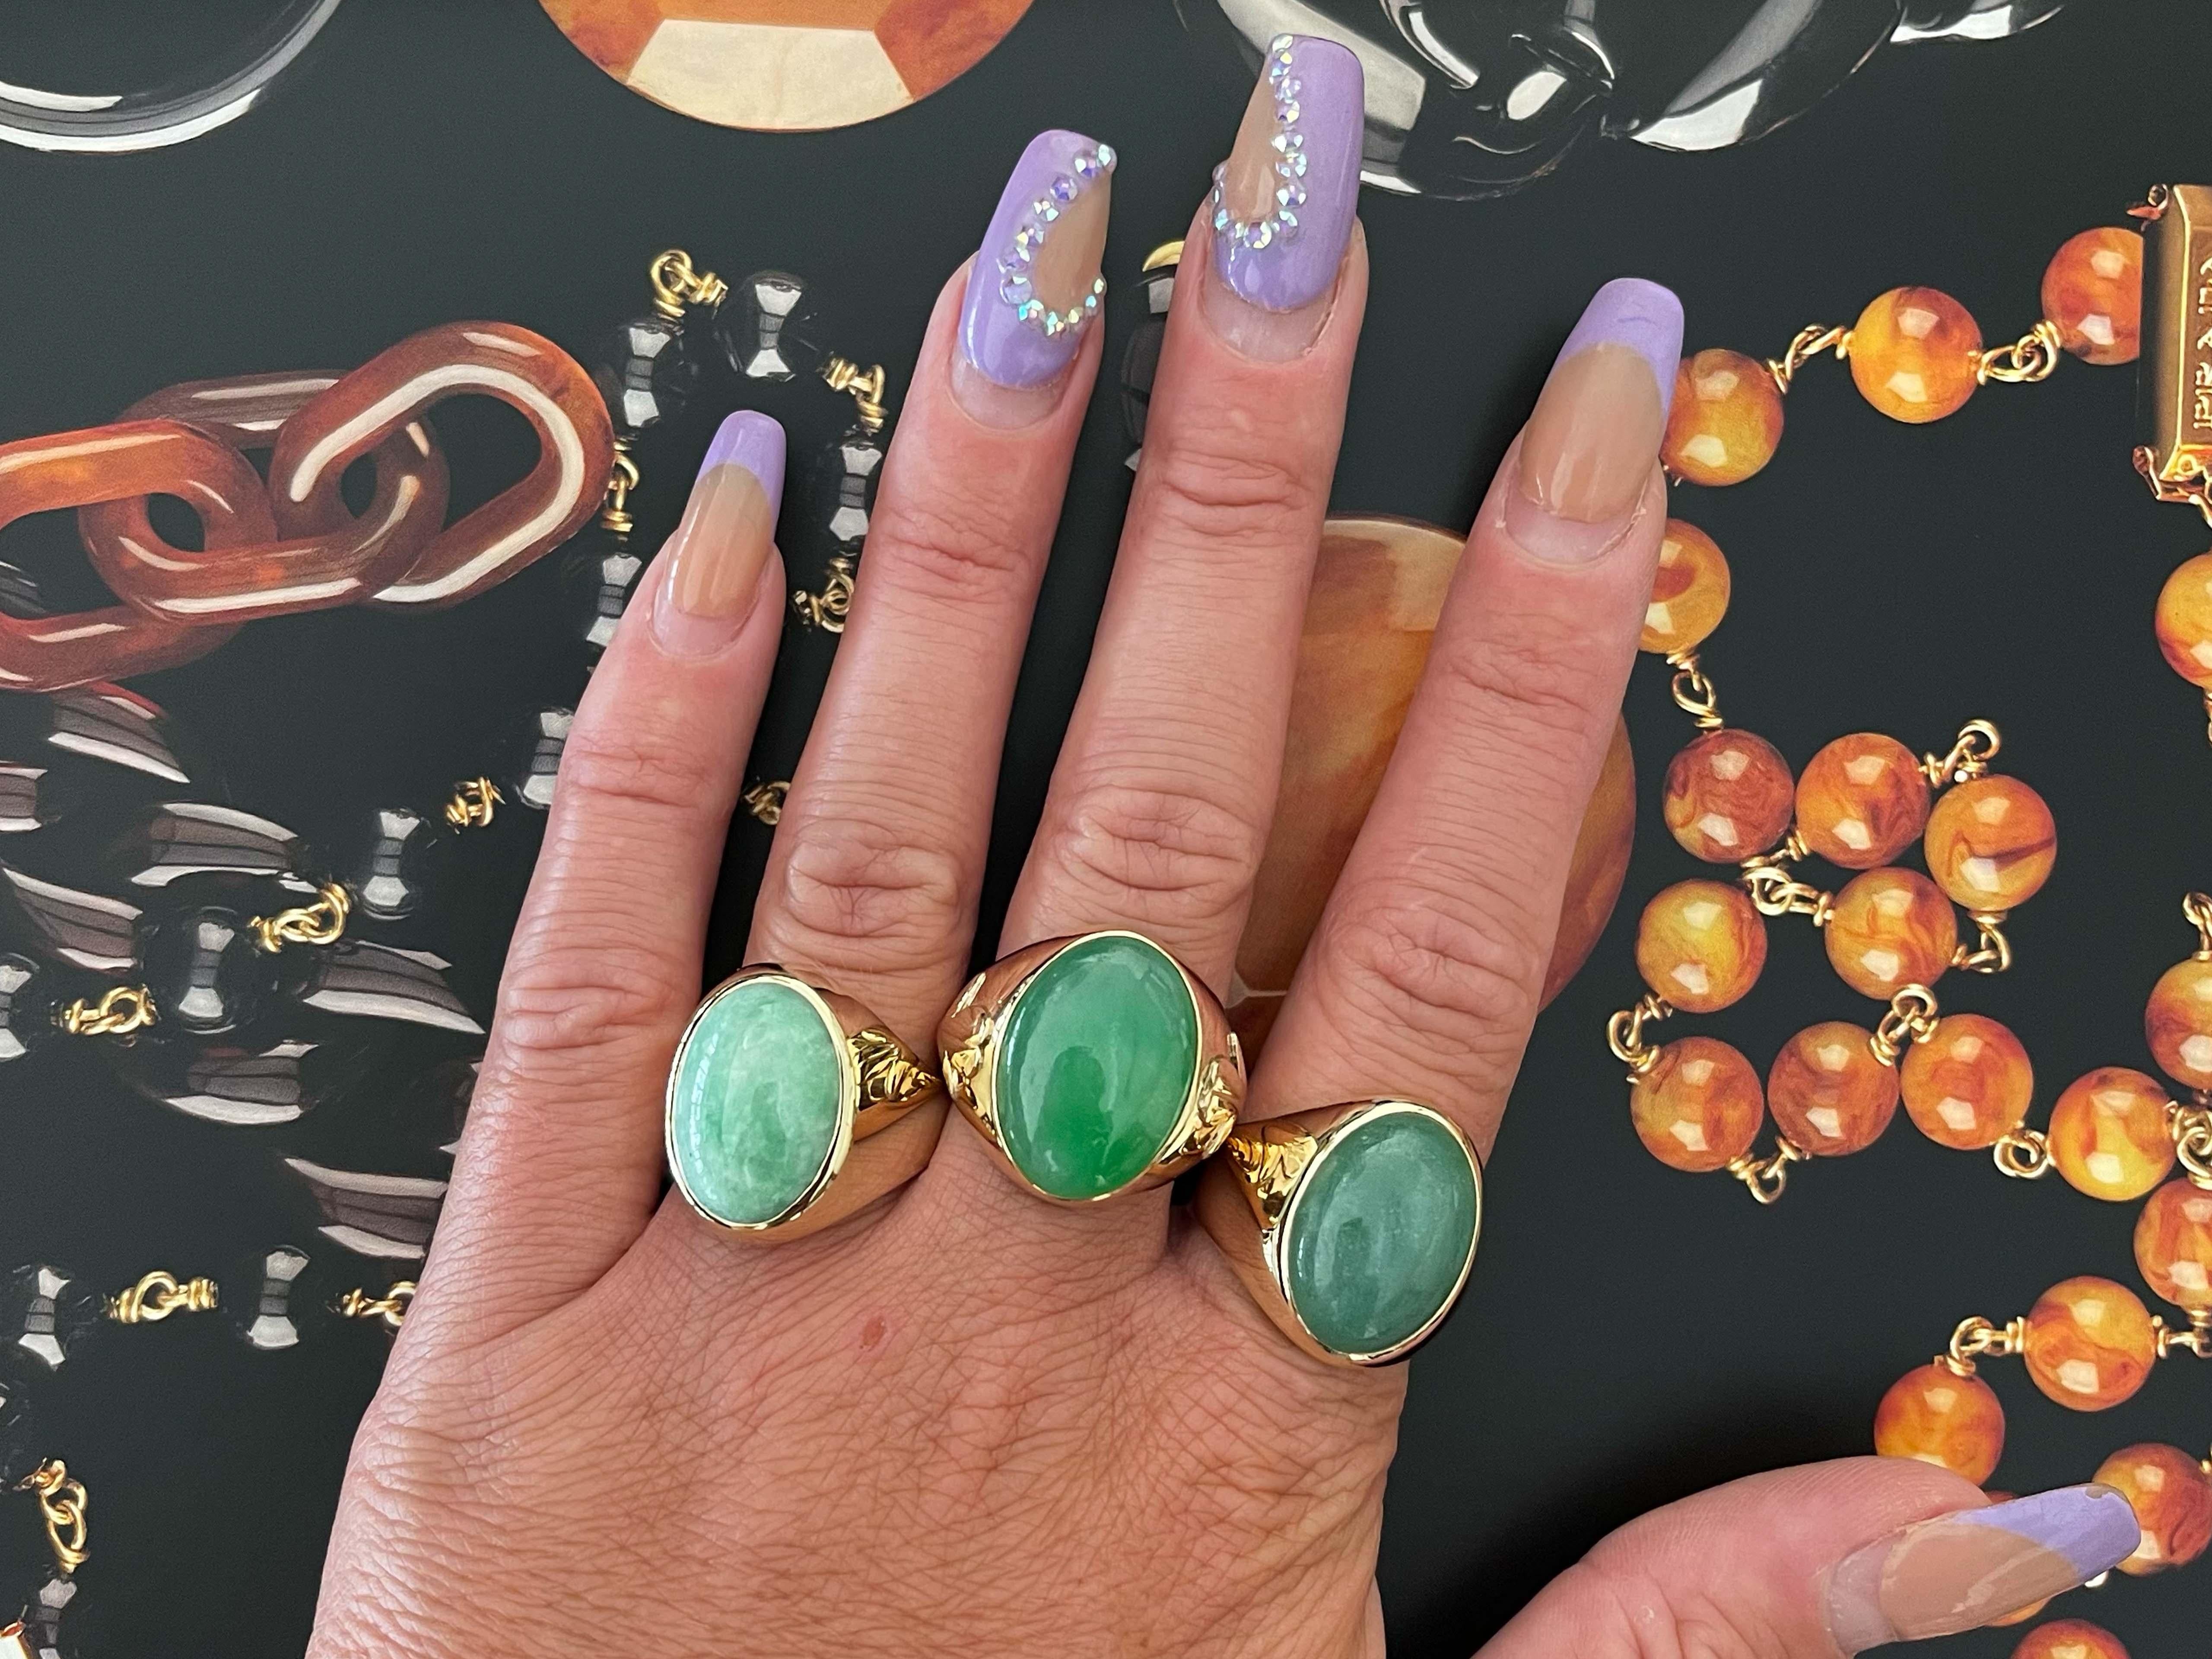 Magnificent vintage oval cabochon pale mottled green jade ring, in 14k yellow gold. The Jade is bezel set and measures approximately 17.78 mm x 12.71 mm x 5.70 mm. The ring has a tapered shank with a high polish finish. The ring is size 8.5 and can